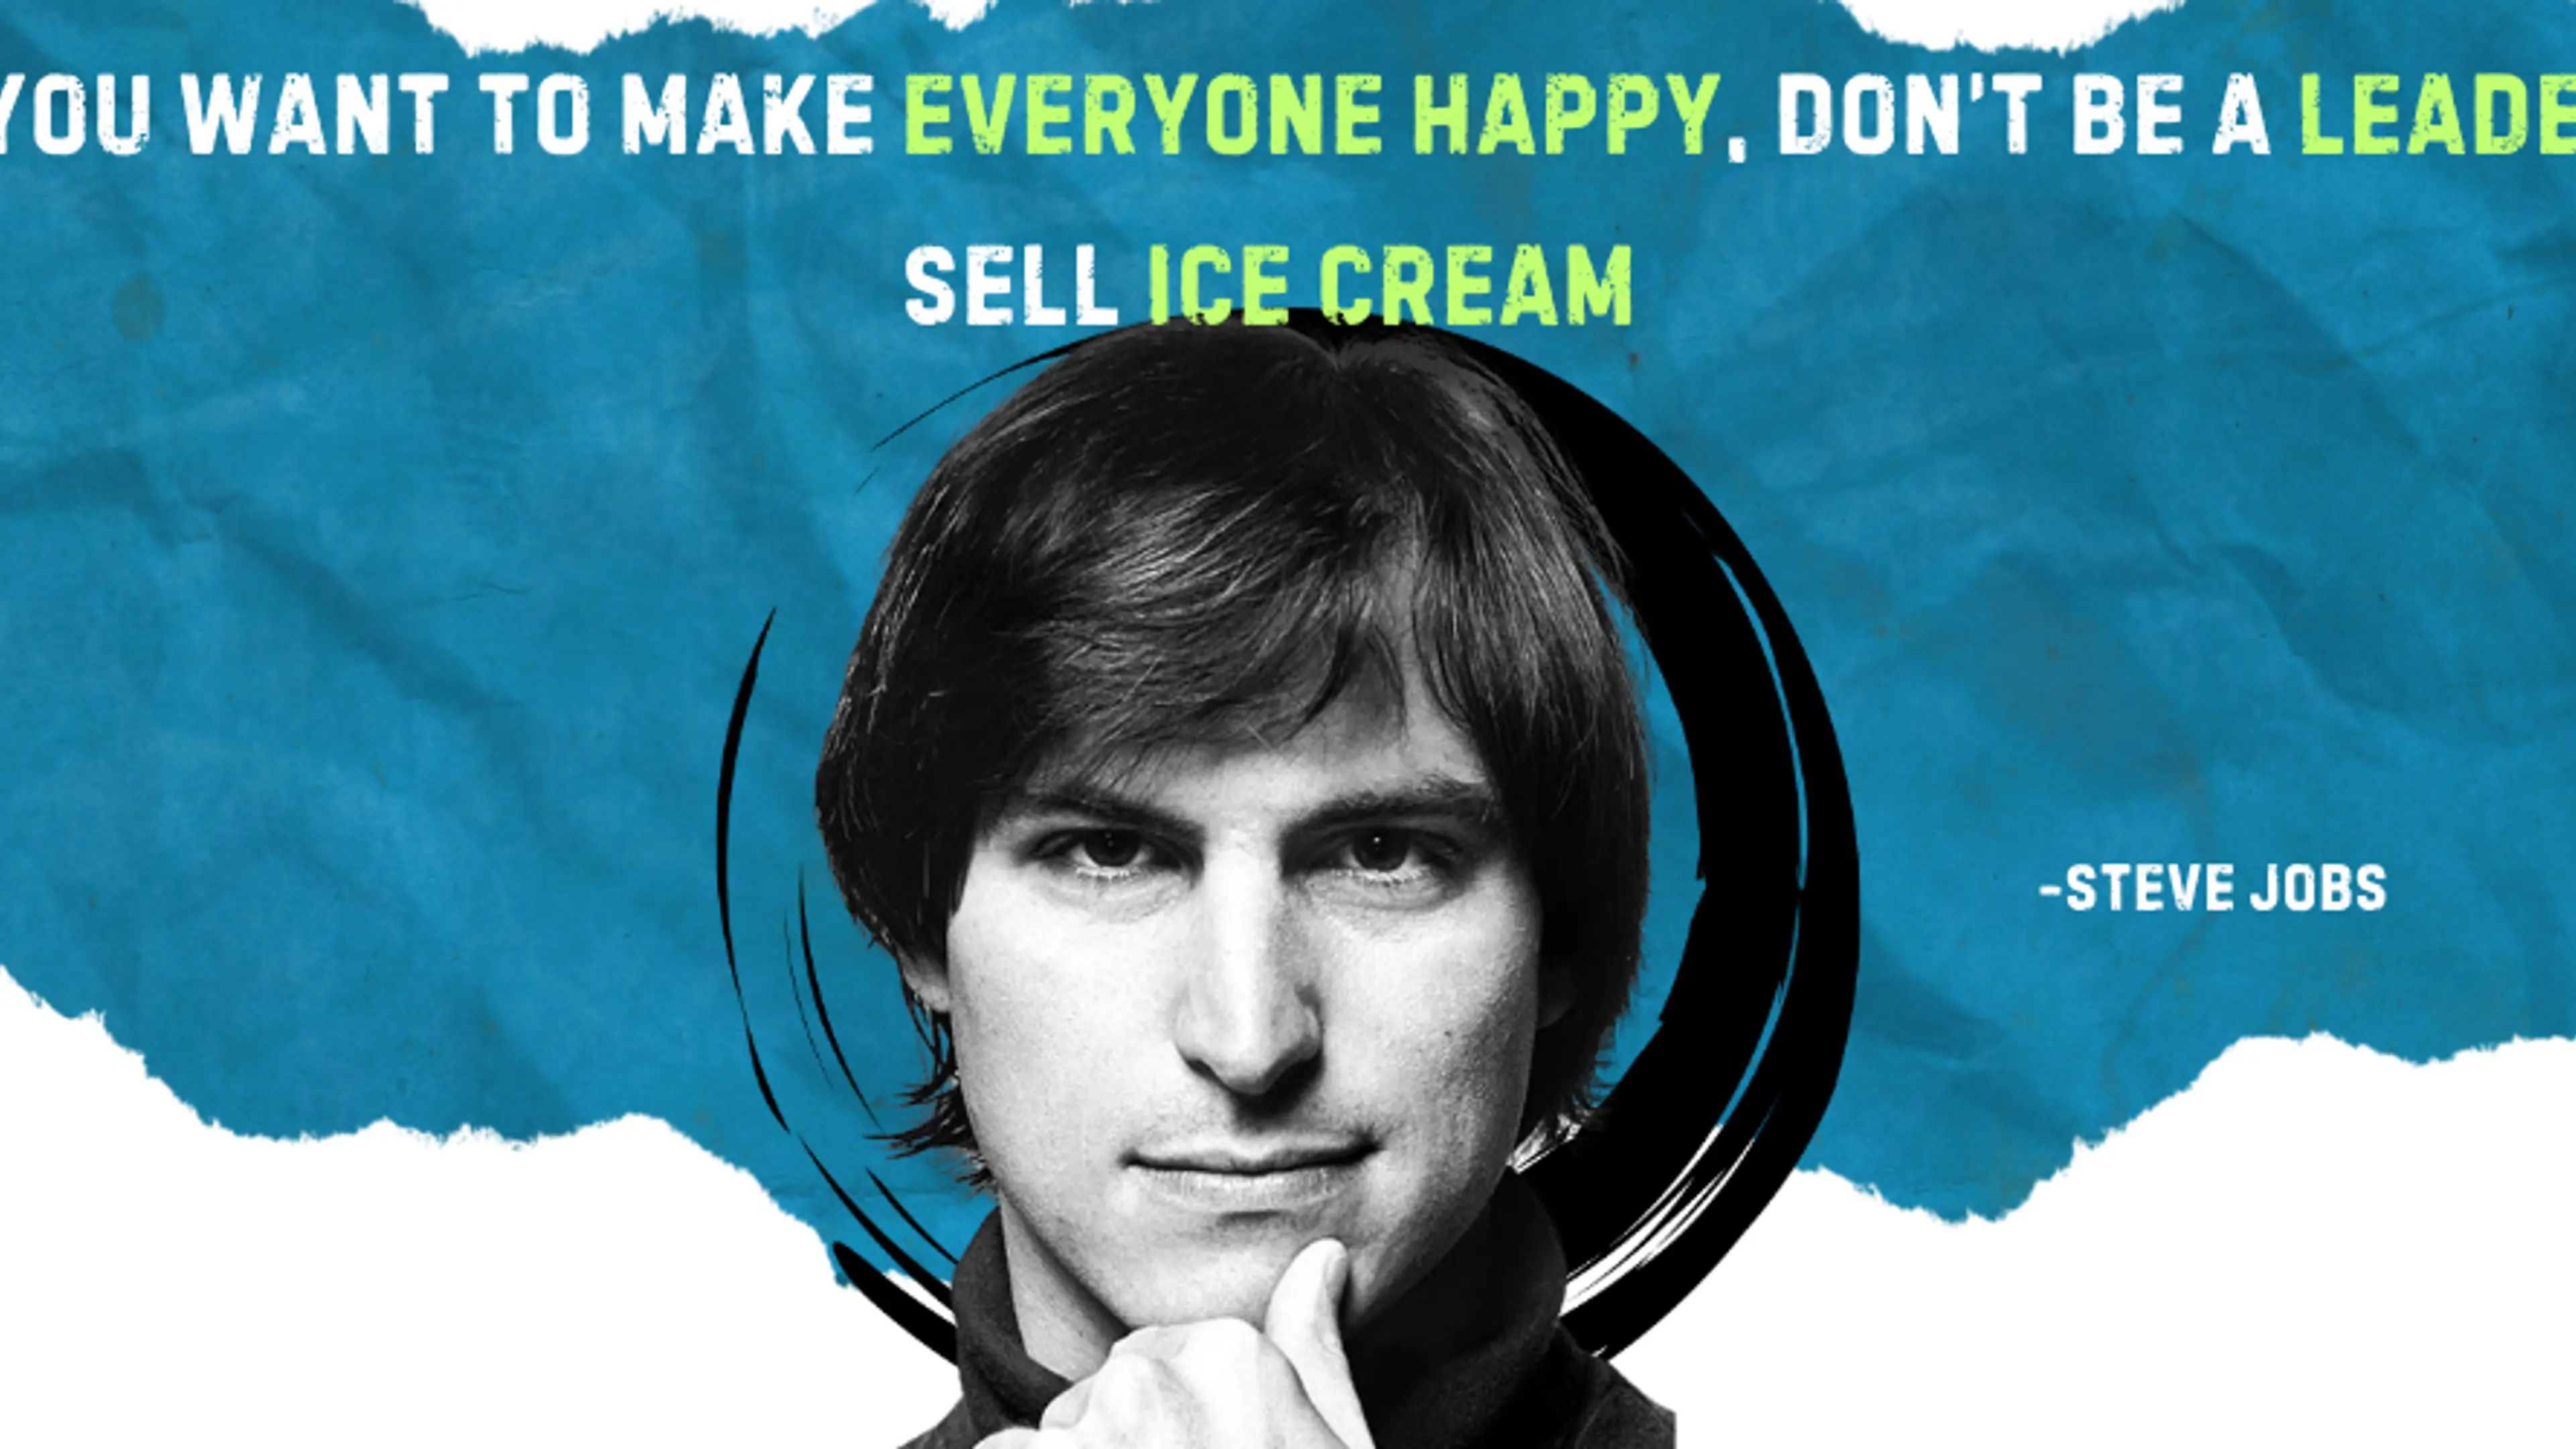 Steve Jobs' Advice: To Make Everyone Happy, Don’t Be a Leader, Sell Ice Cream